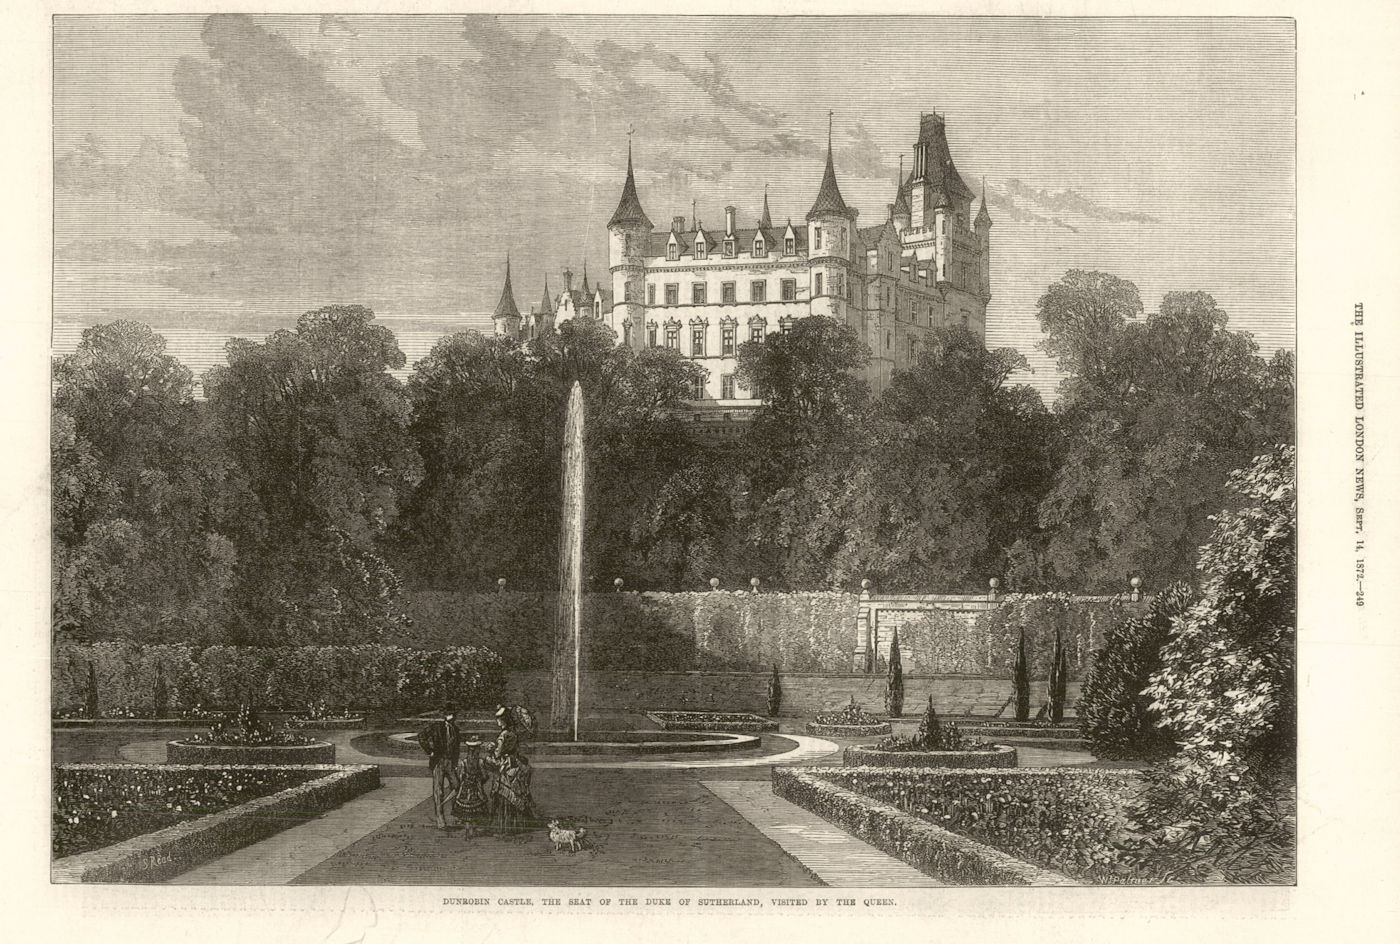 Associate Product Dunrobin Castle, seat of the Duke of Sutherland, visited by Queen Victoria 1872